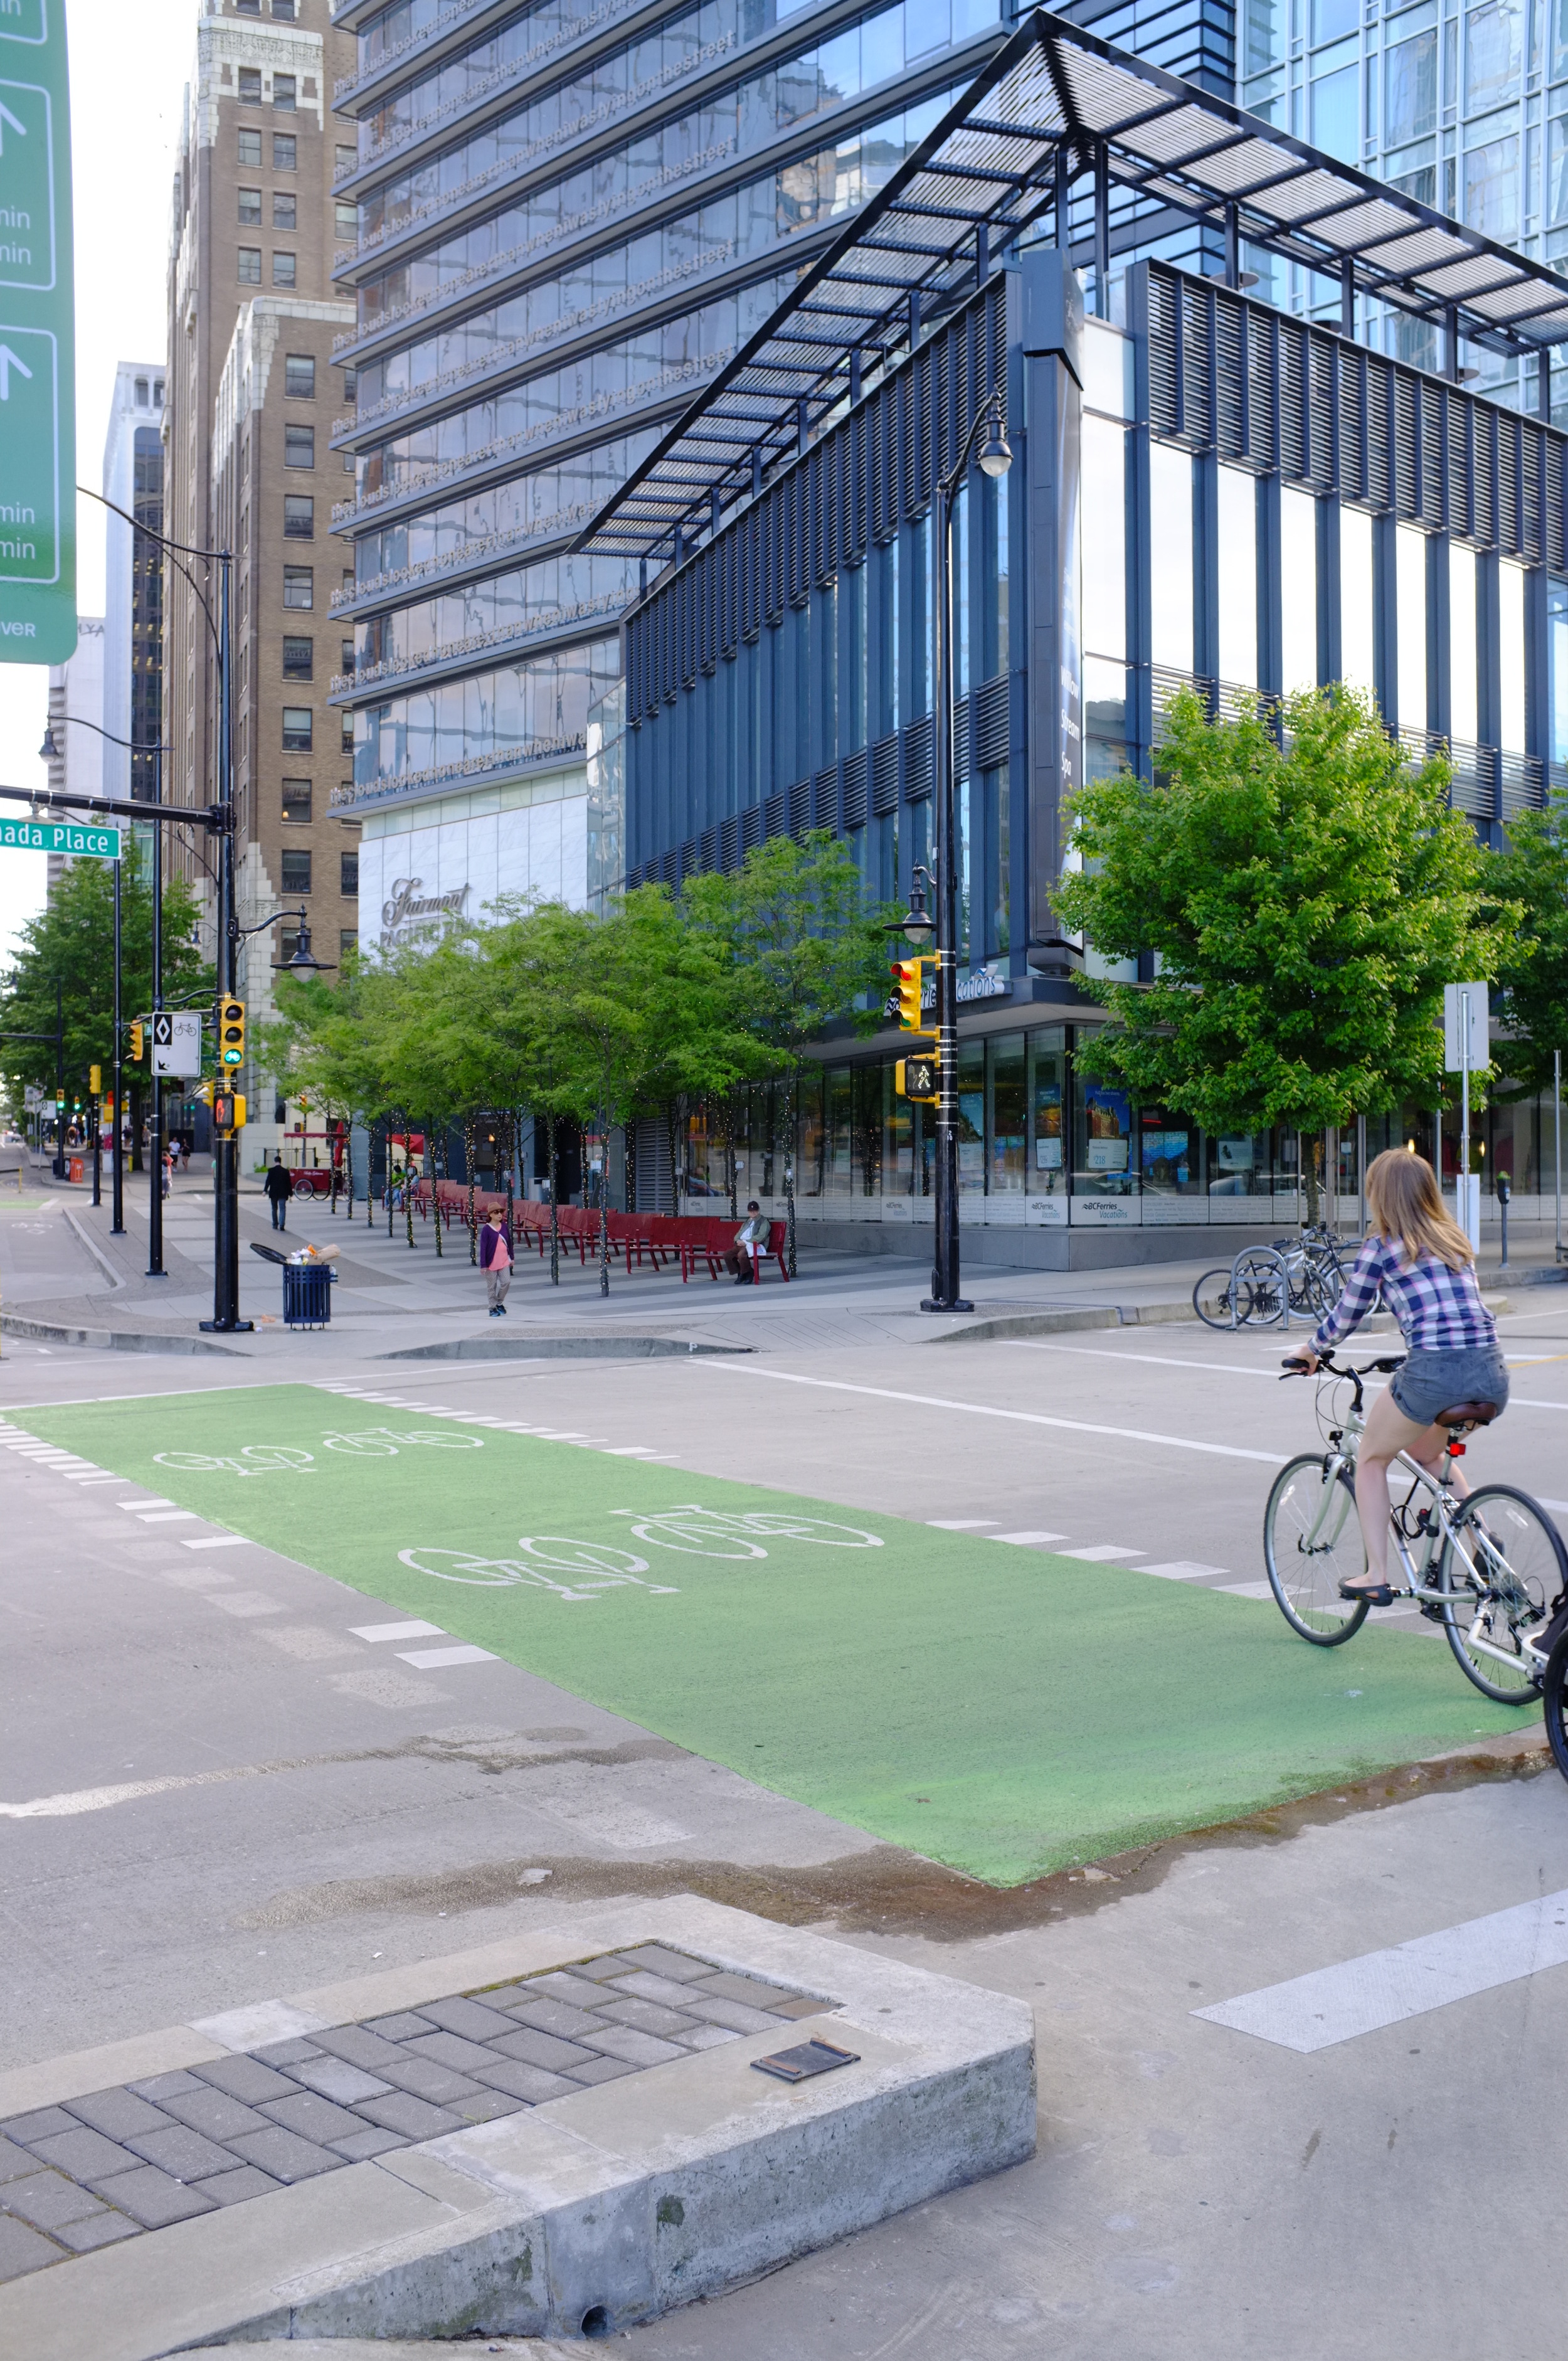 Burrard Street cycle track makes for comfortable city riding